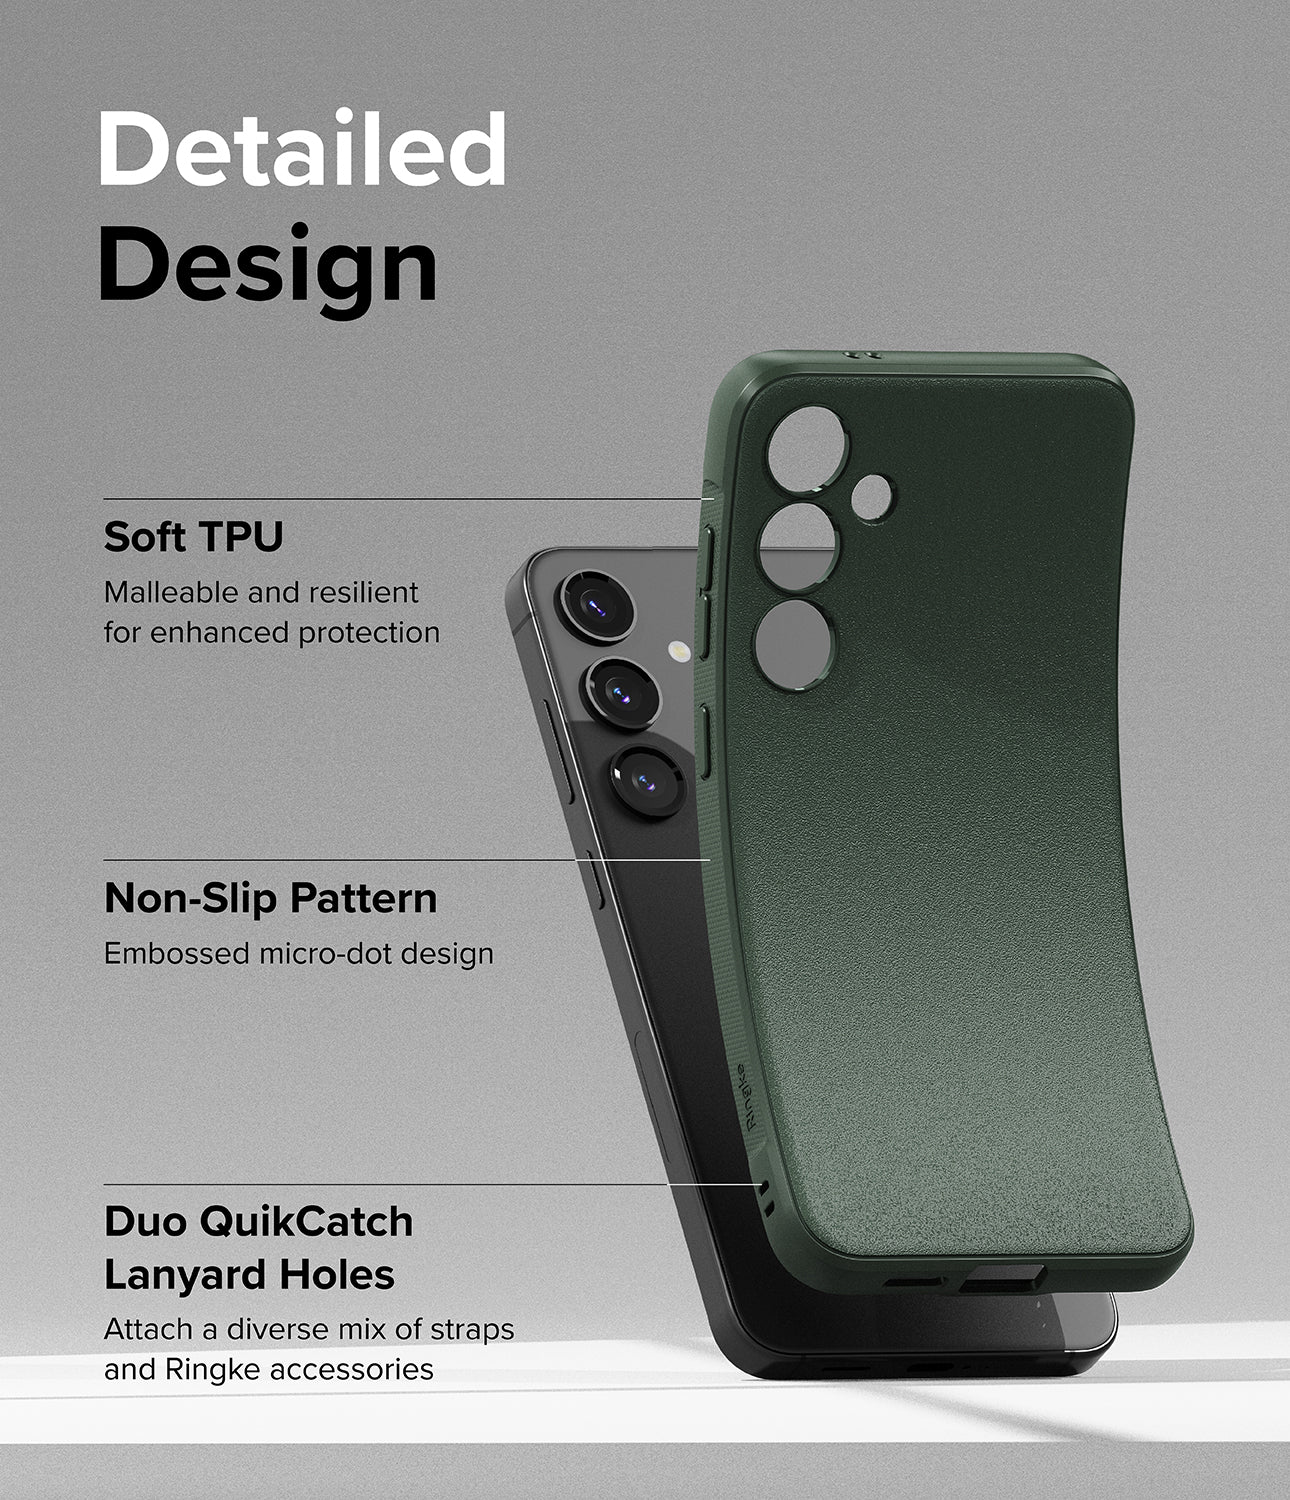 Galaxy S24 Case | Onyx - Dark Green - Detailed Design. Malleable and resilient for enhanced protection with Soft TPU. Embossed micro-dot design with Non-Slip Pattern. Attach a diverse mix of straps and Ringke accessories with Duo QuikCatch Lanyard Holes.